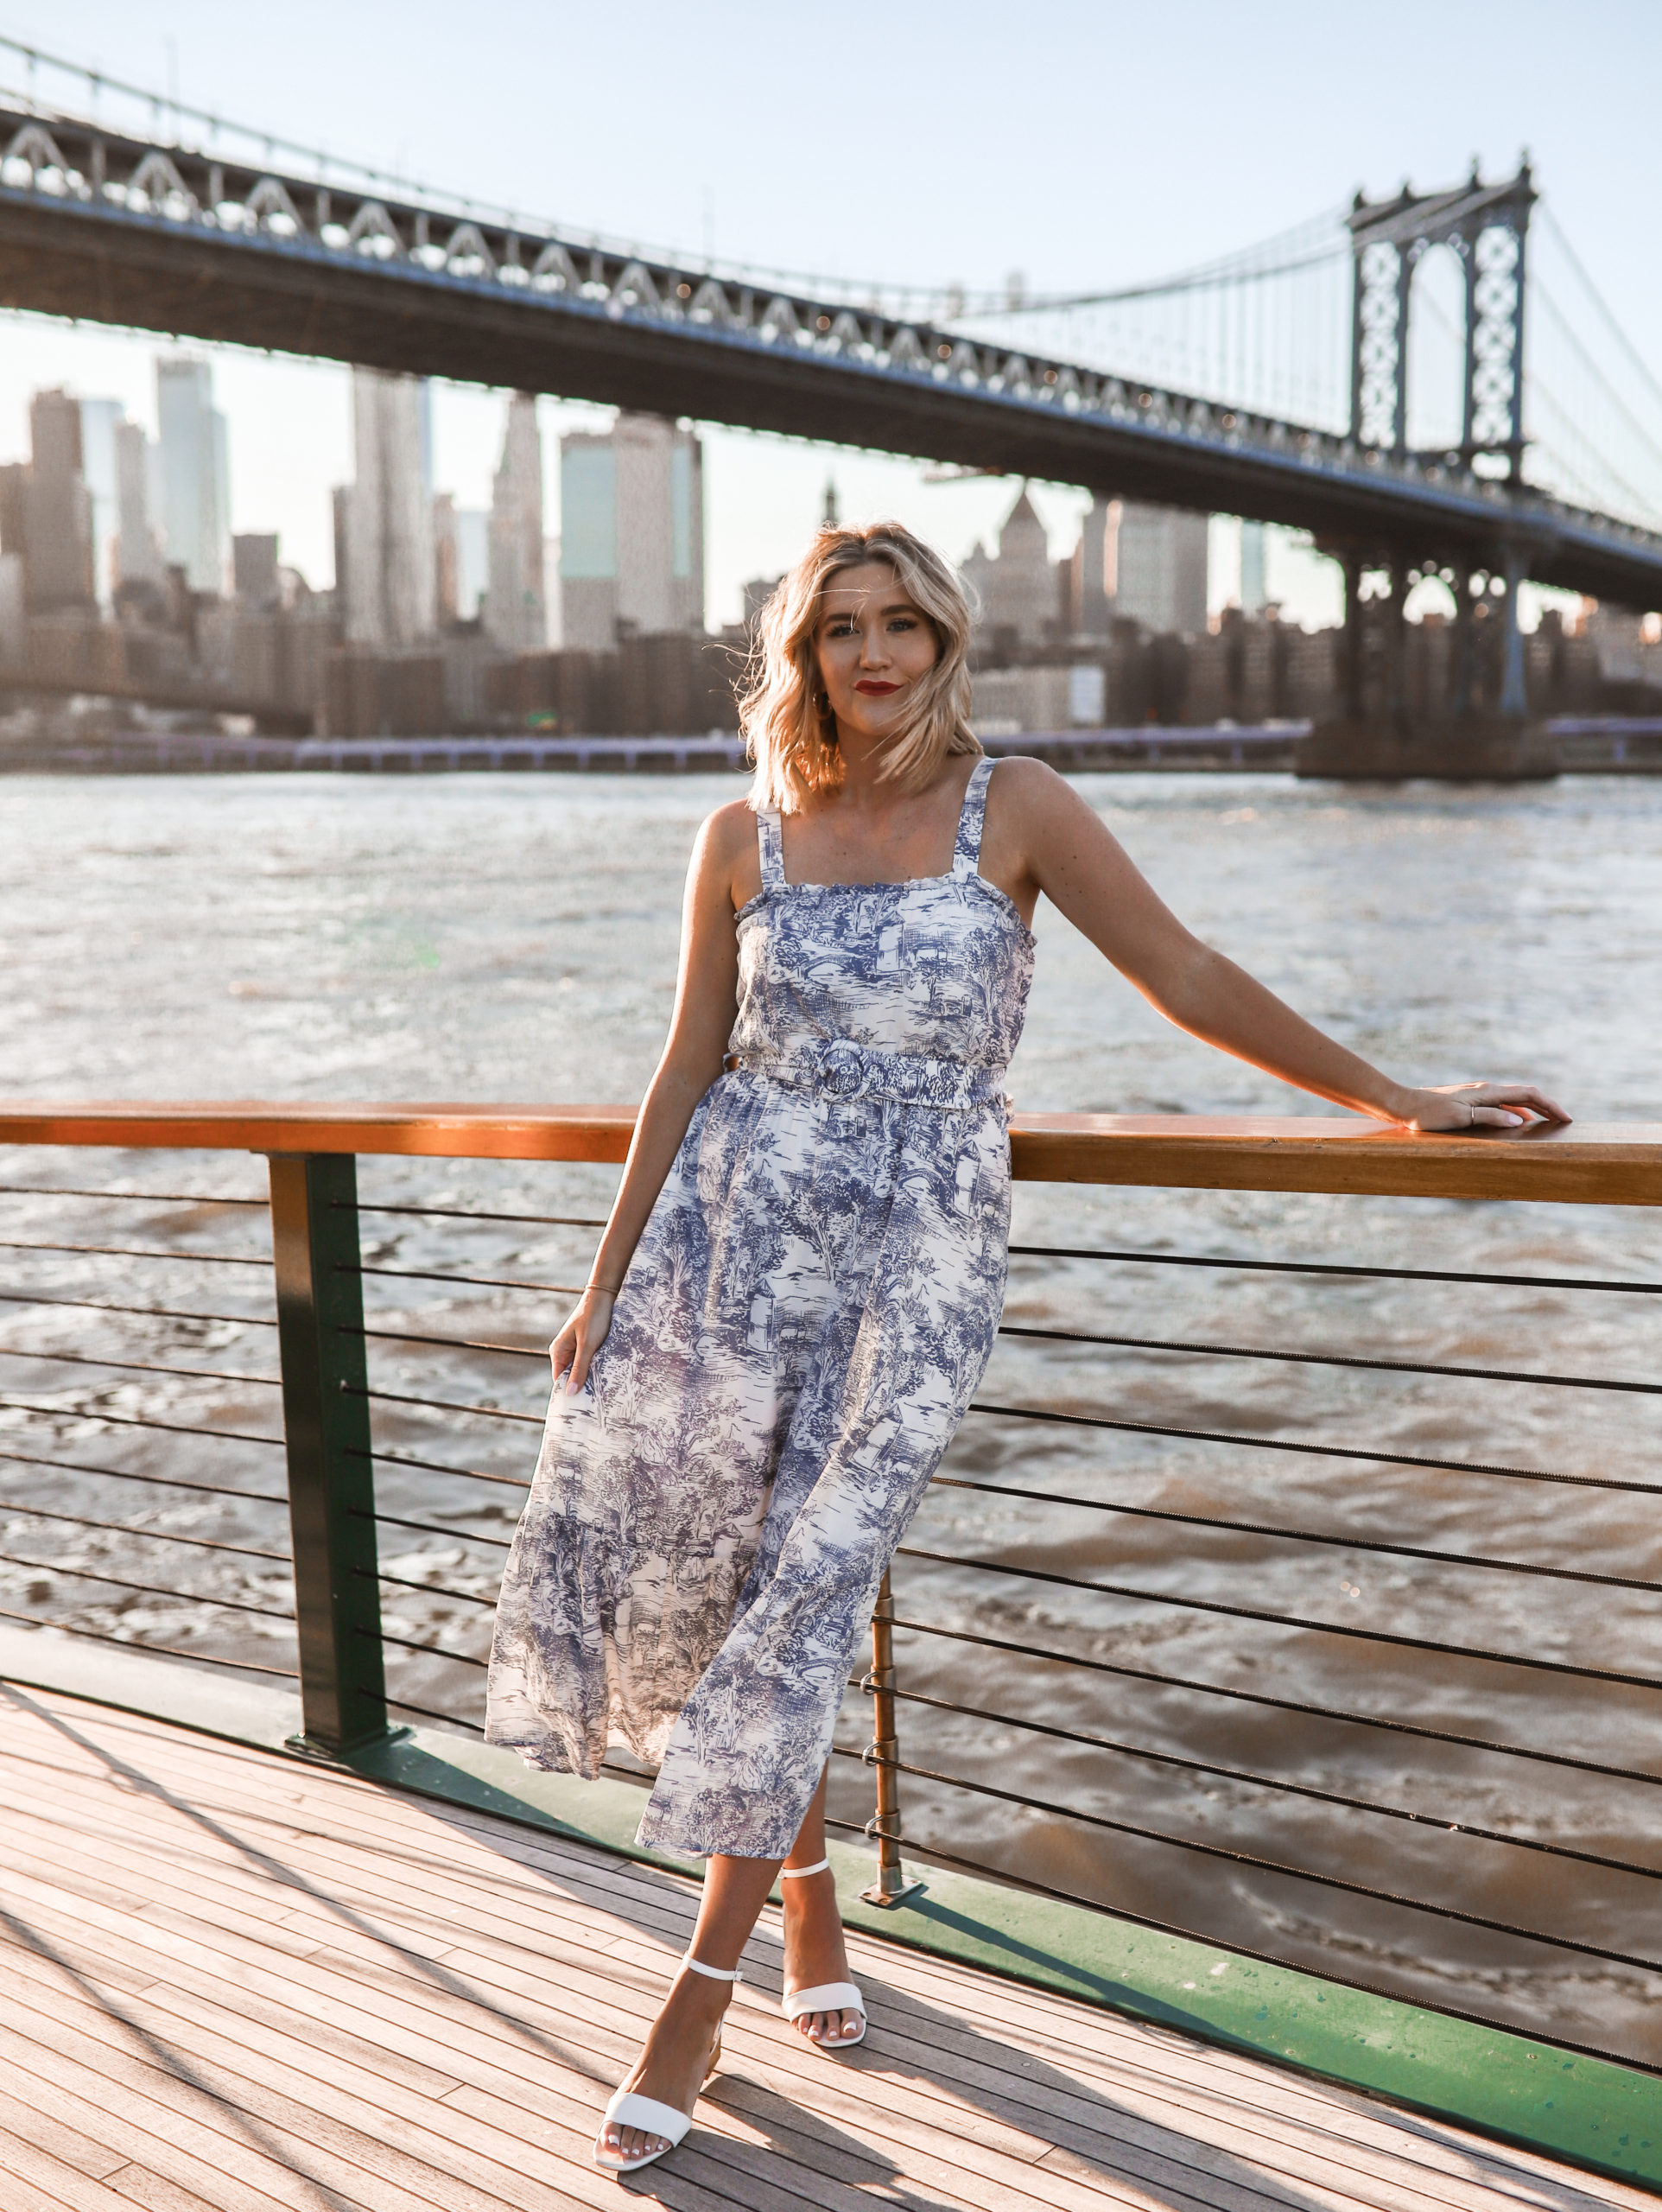 Anna standing on a pier in Brooklyn with the Brooklyn Bridge behind her as she's wearing a dress.